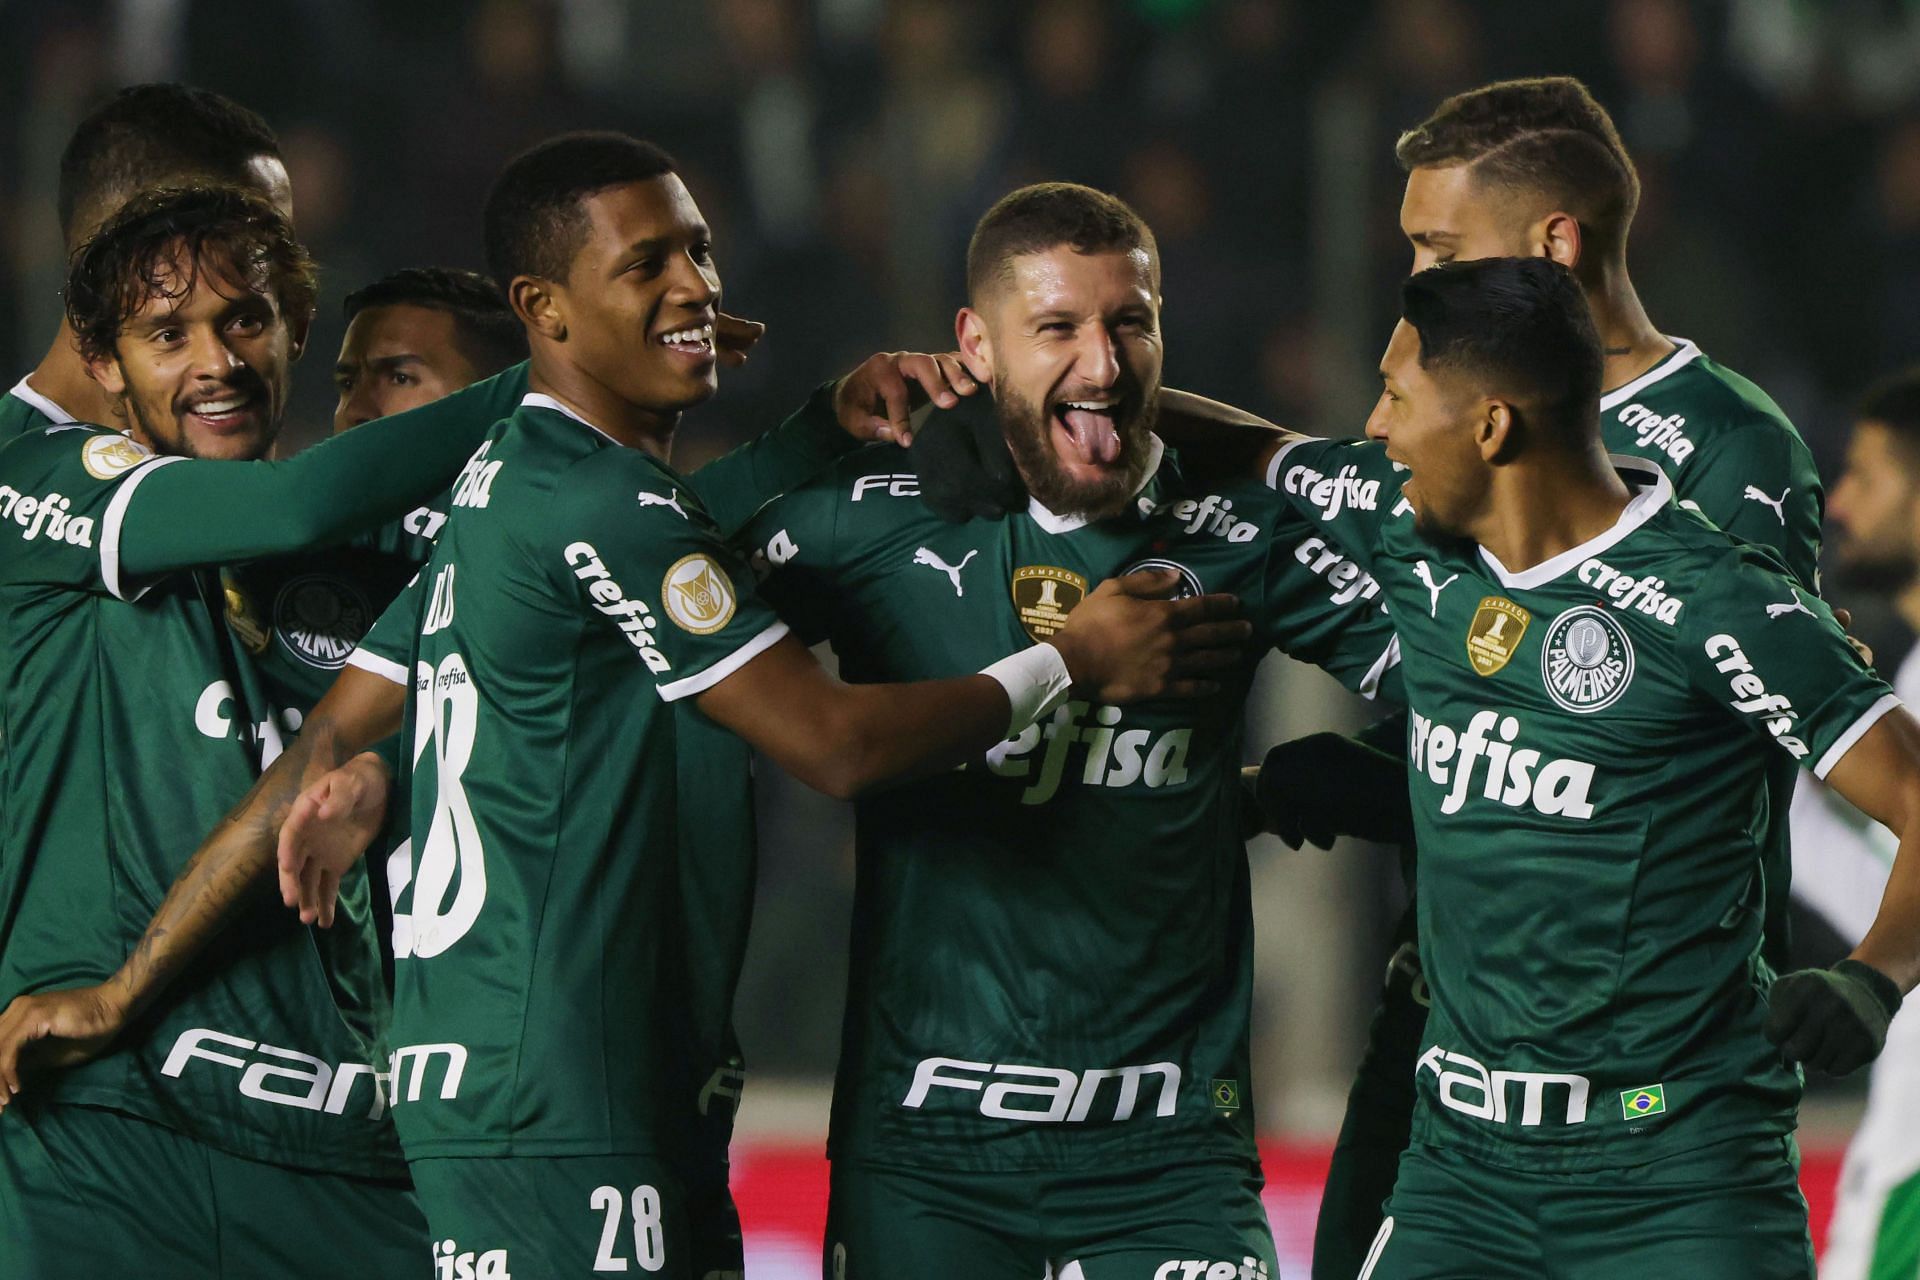 Palmeiras will be looking to maintain their 100% record in the Copa Libertadores as they take on Deportivo Tachira